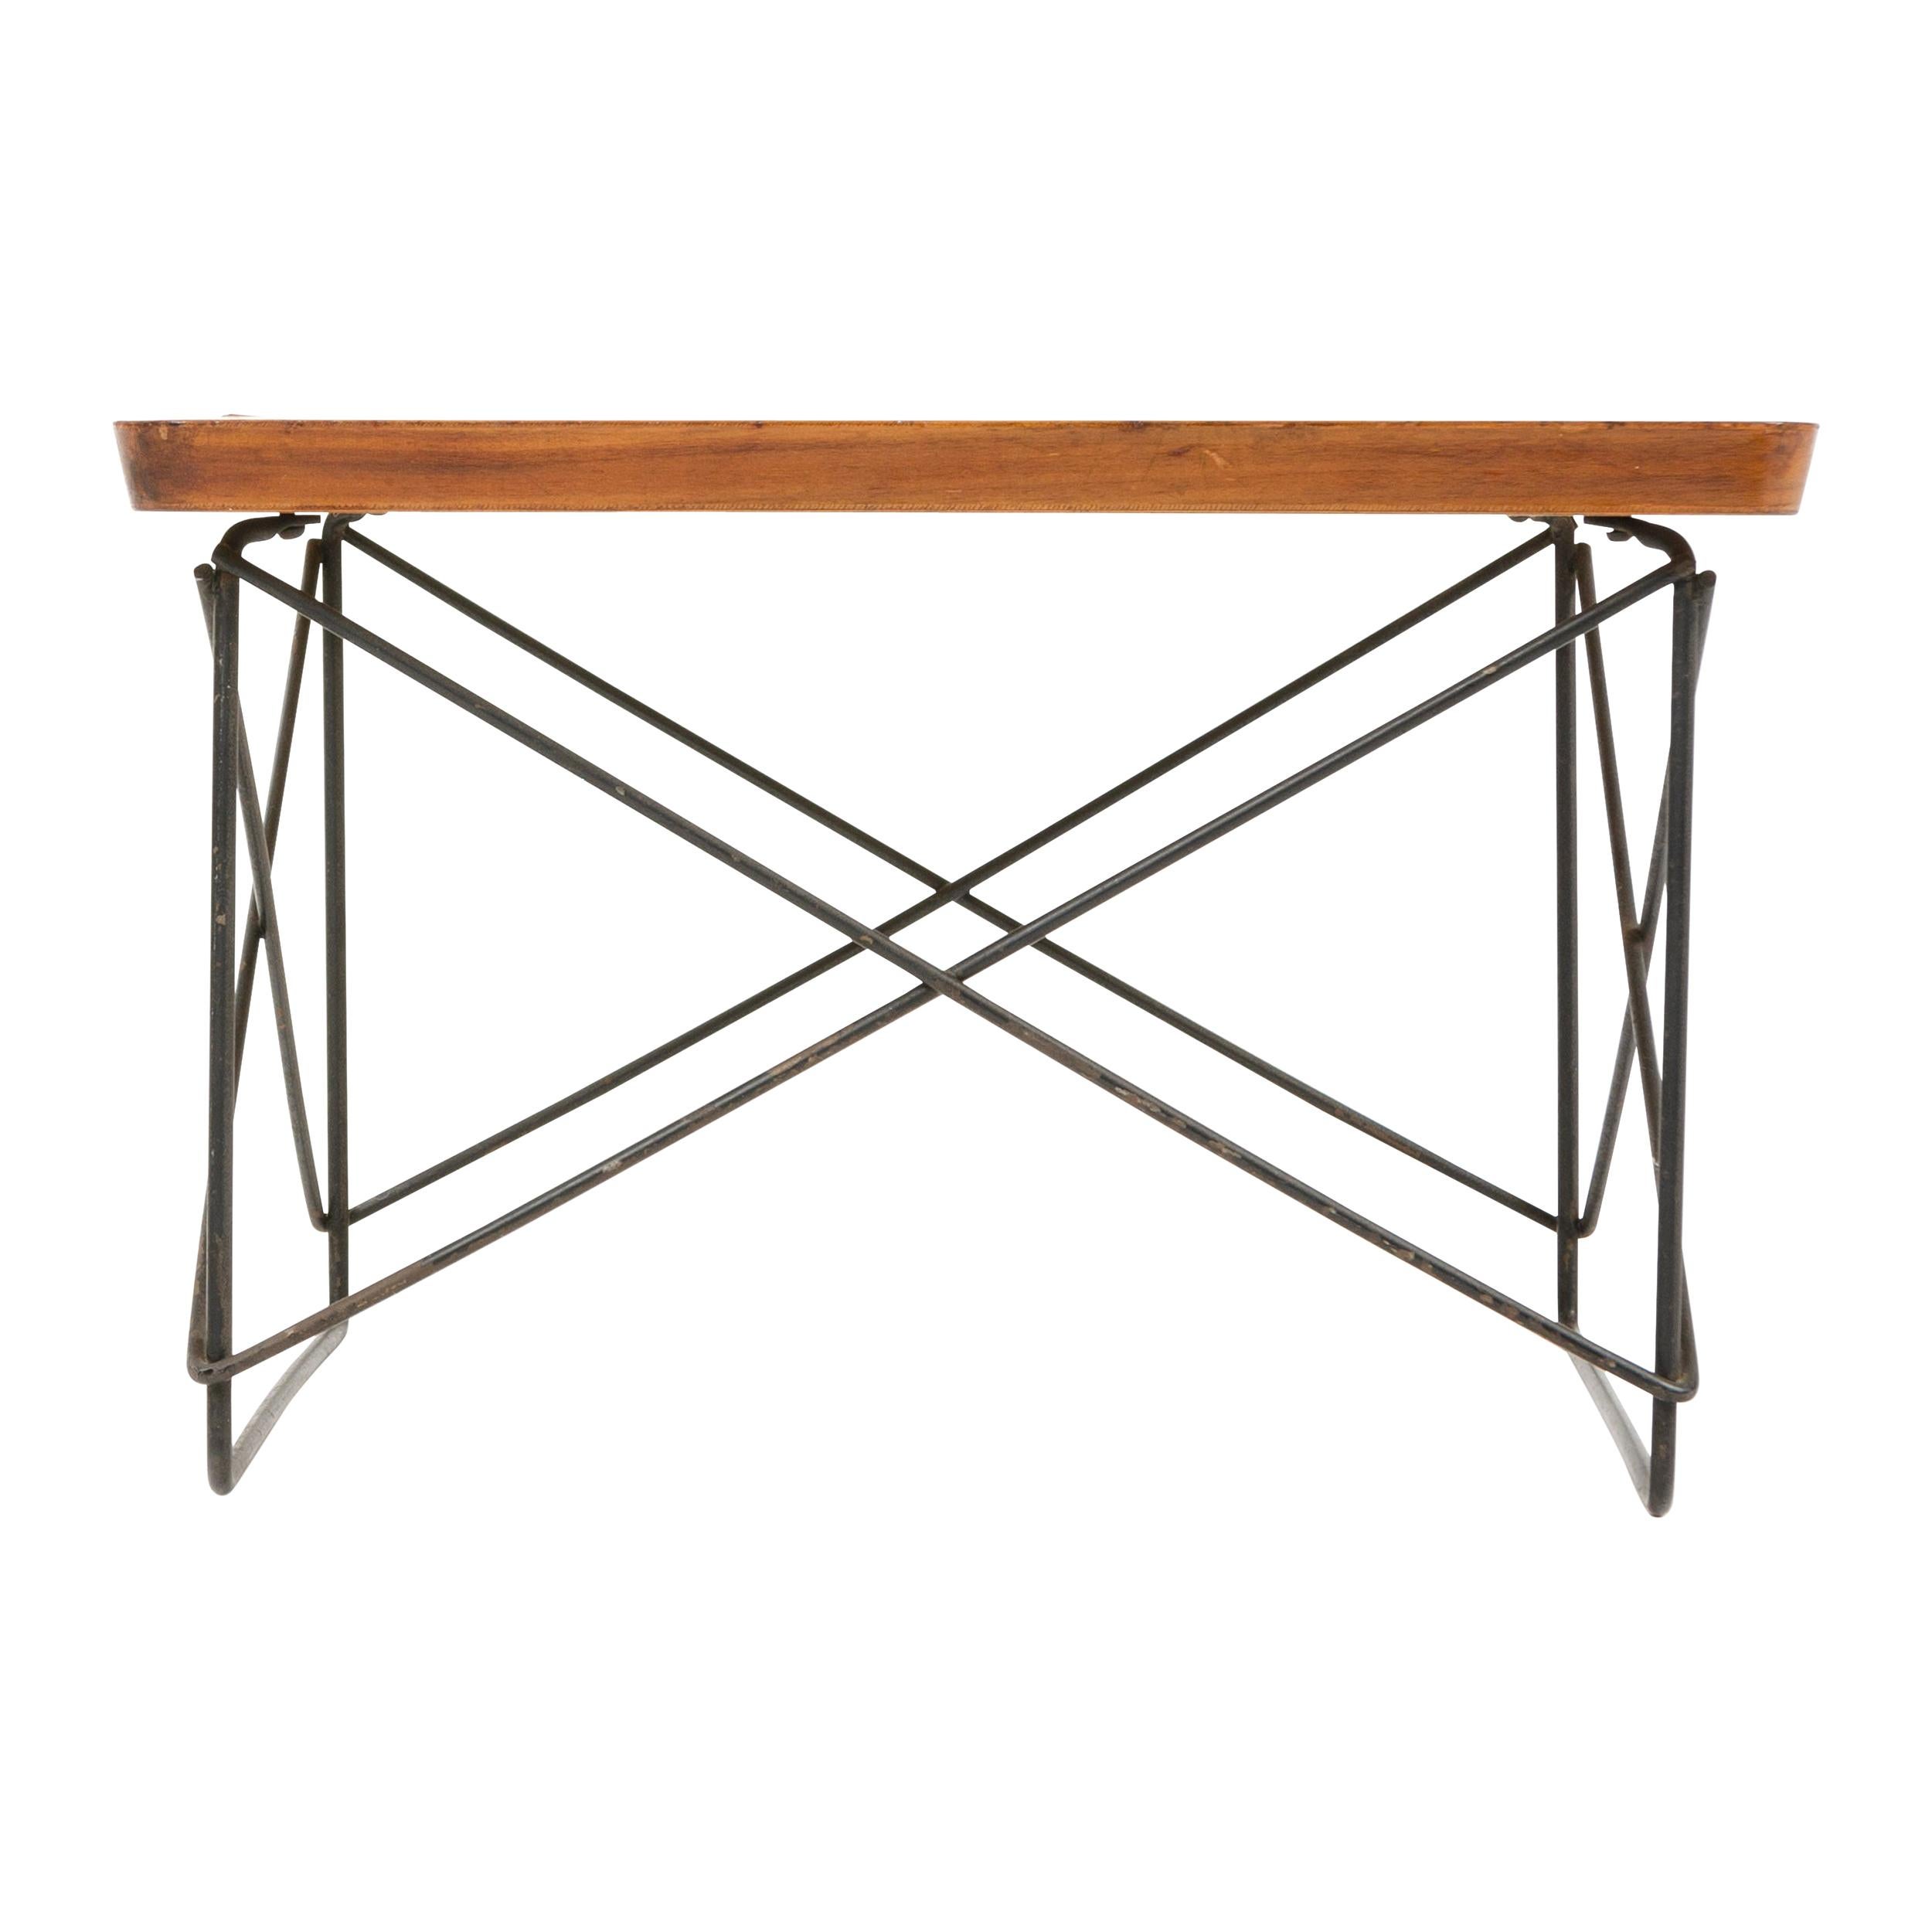 1950s 'LTR' Table by Charles and Ray Eames for Herman Miller